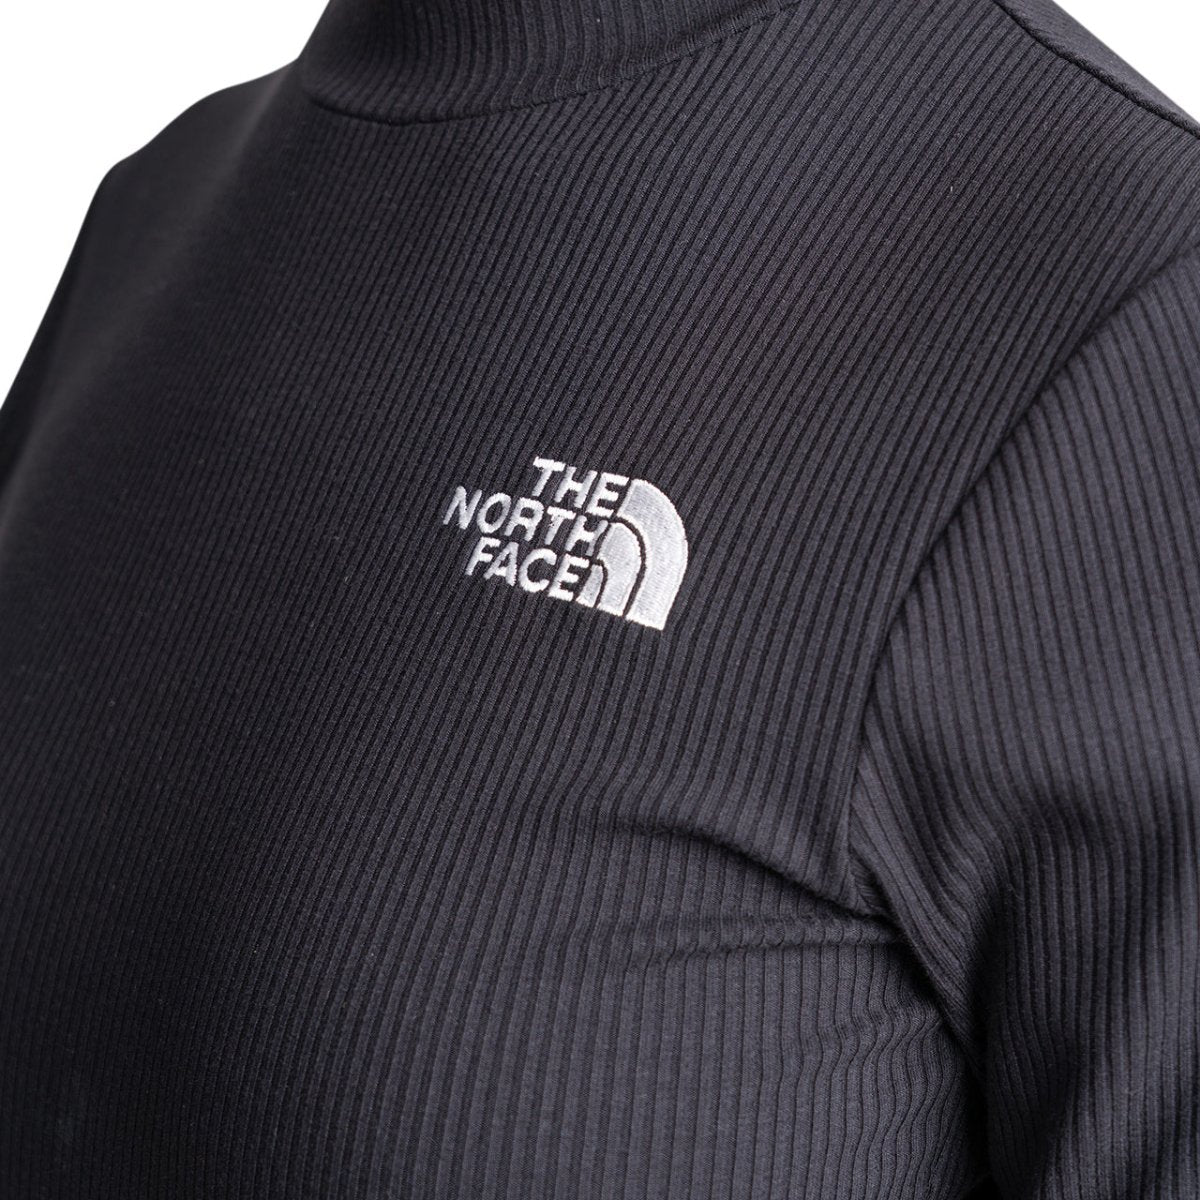 The North Face WMNS 3/4 Body (Schwarz)  - Allike Store